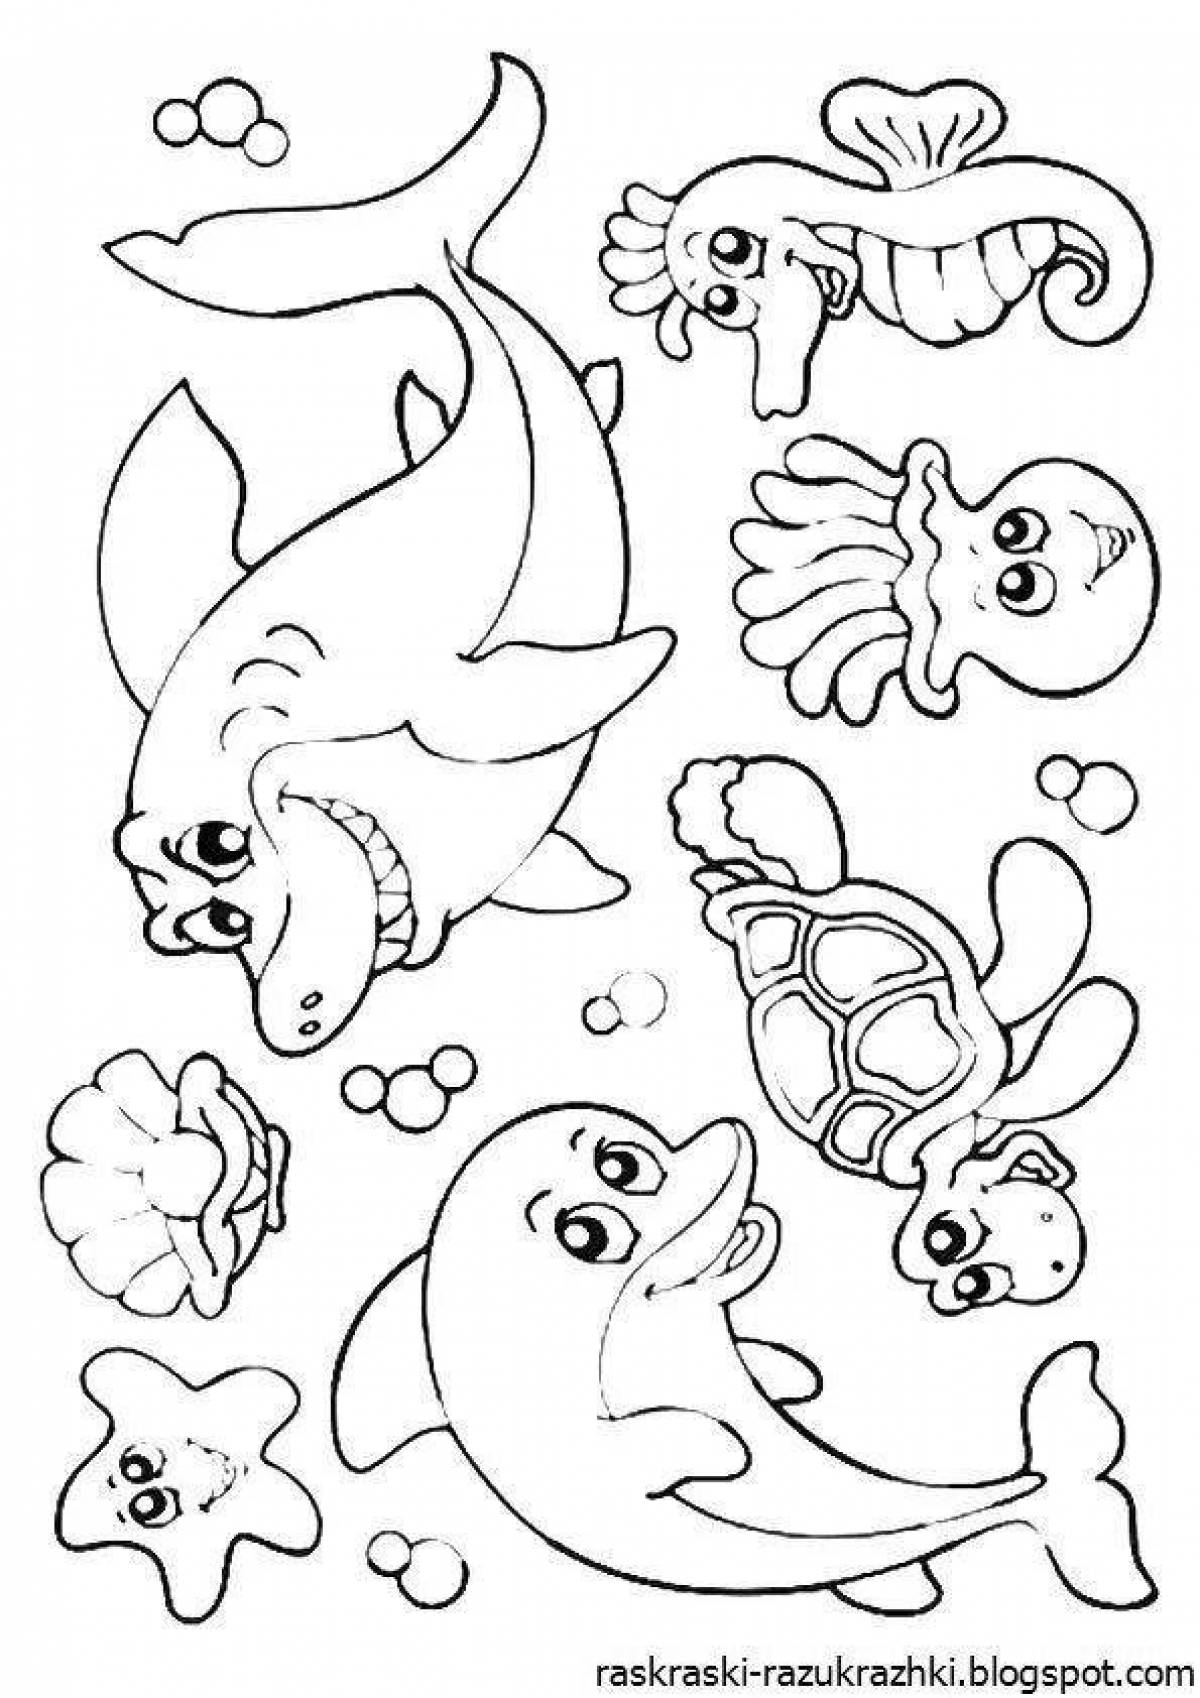 Amazing sea animal coloring book for kids